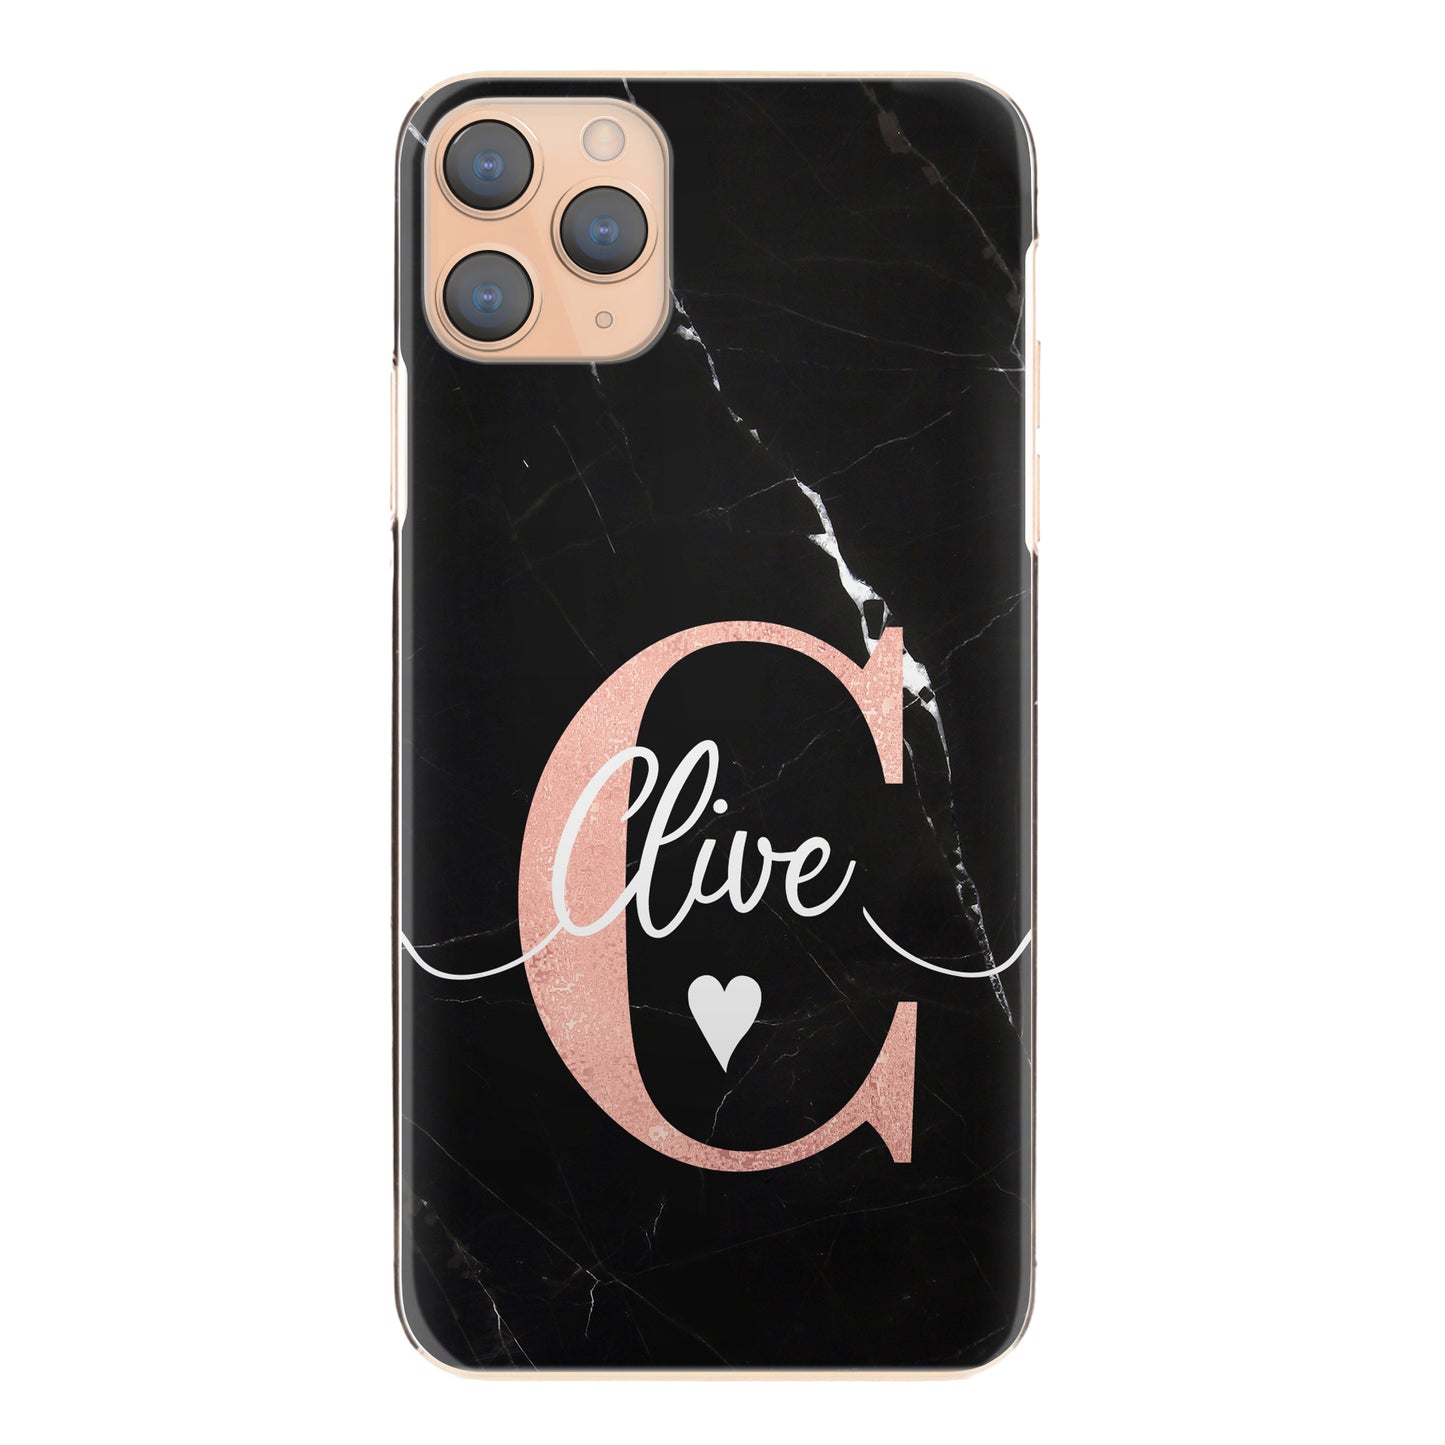 Personalised Oppo Phone Hard Case with Stylish Heart Text and Pink Initial on White Infused Black Marble